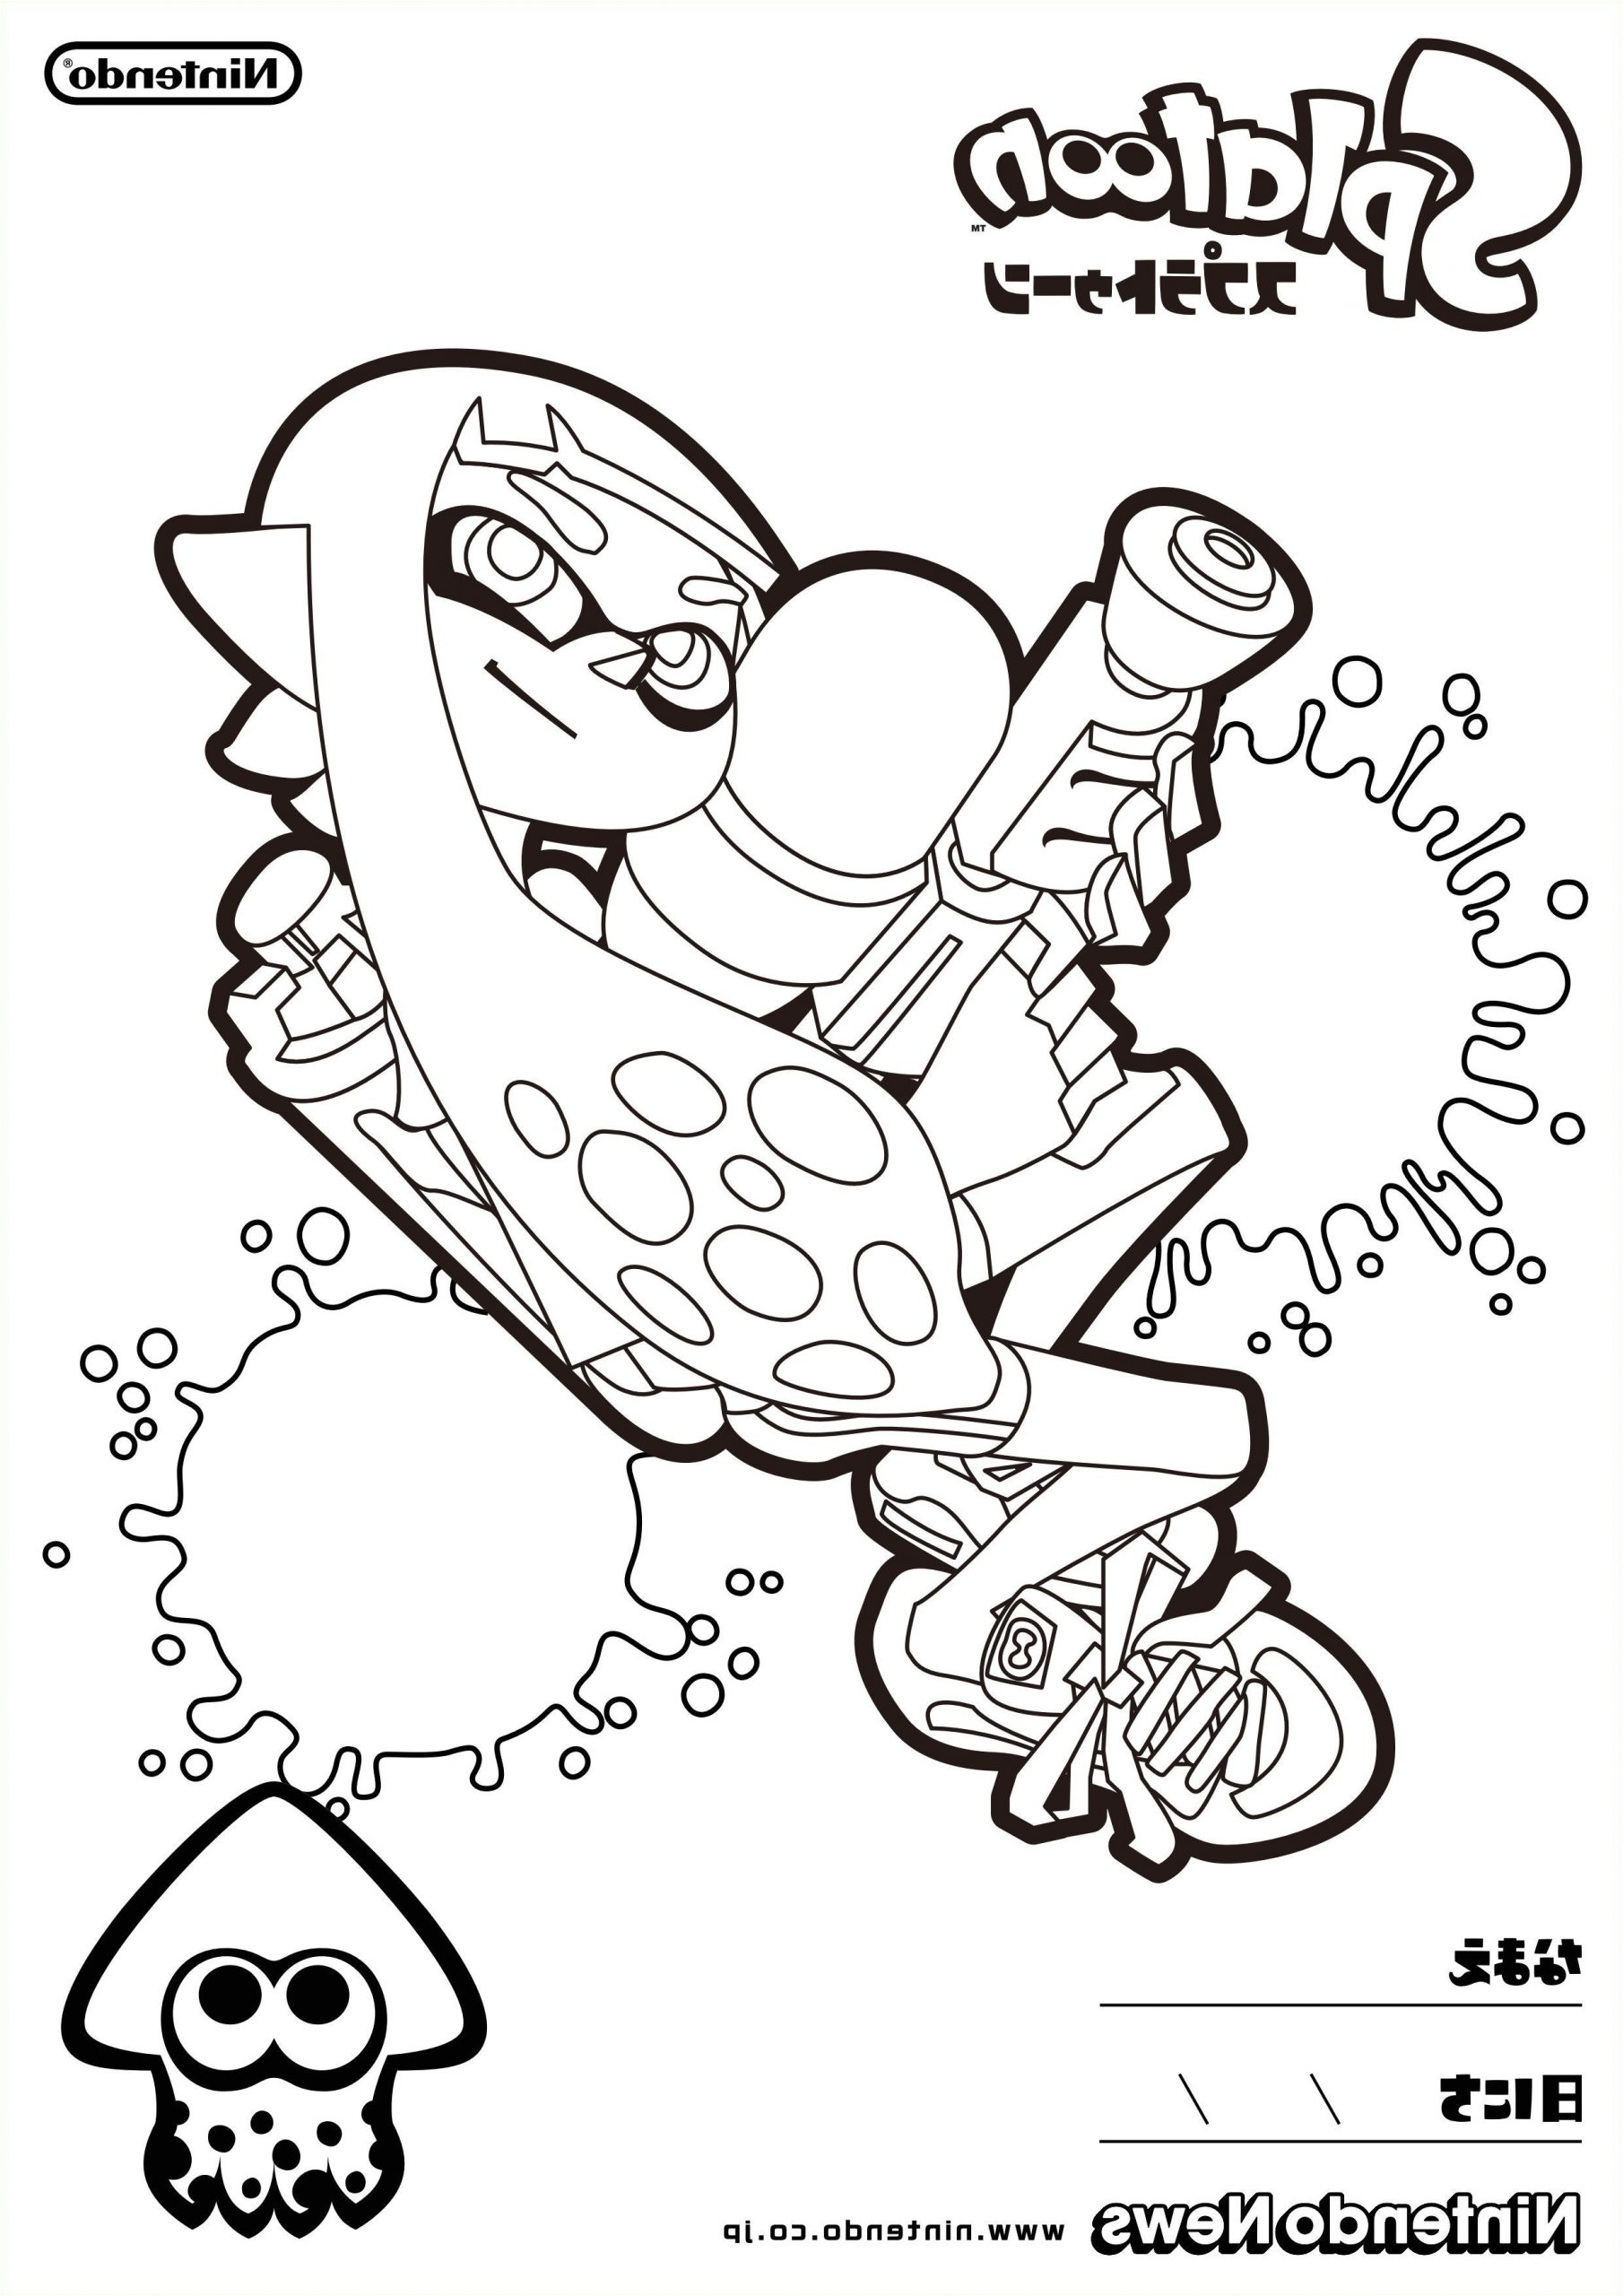 Coloriage Spiderman Lego Inspirant Images 15 top Coloriage Spiderman Lego Pics